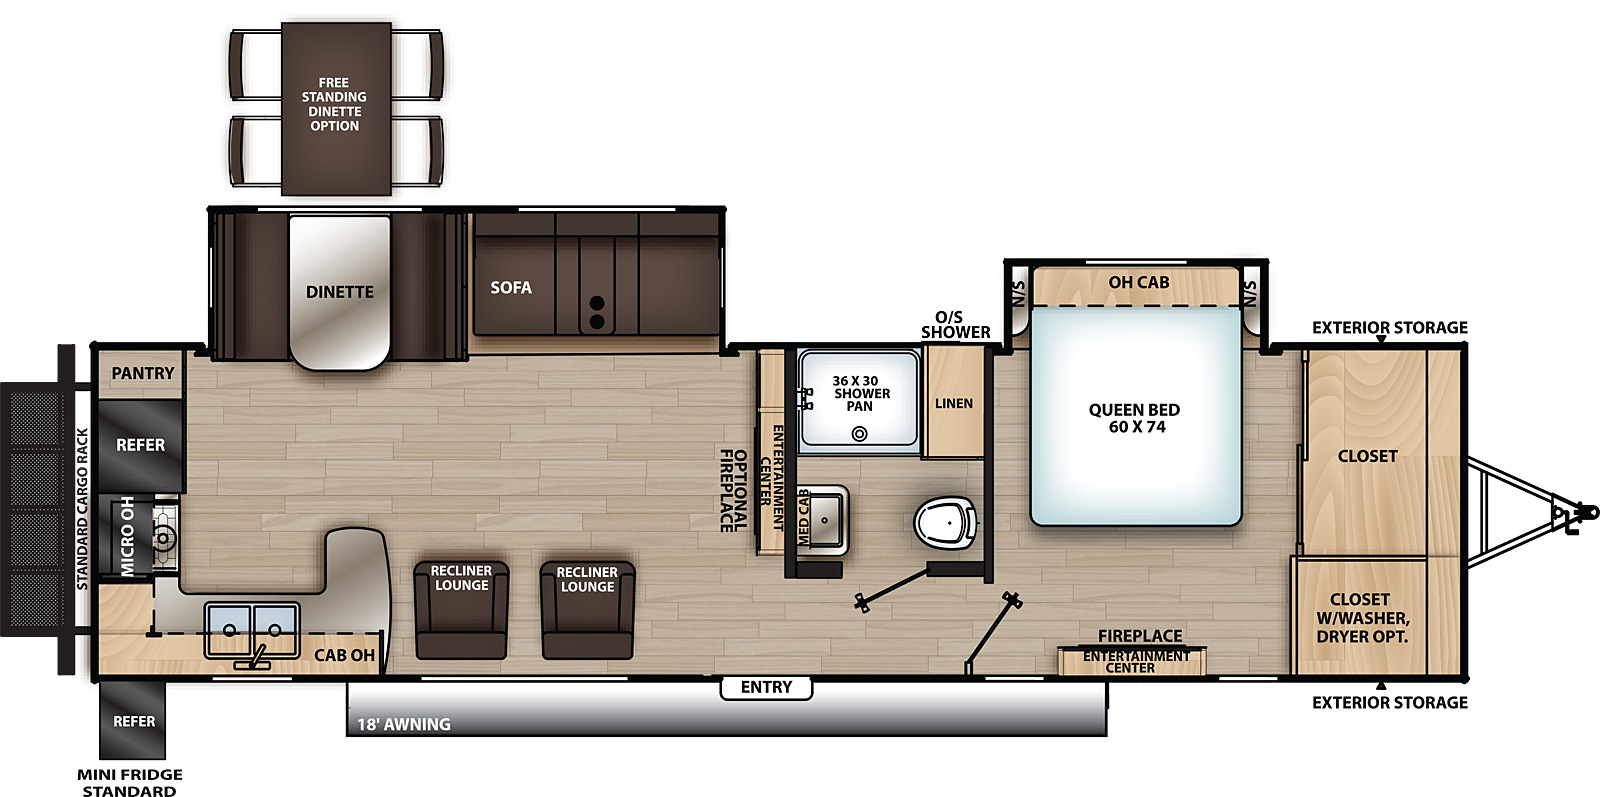 The 303RKDS has two slide outs on the off-door side and one entry door on the door side. Interior layout from front to back: front bedroom with closet, off-door side slide out containing side facing queen bed and overhead cabinet, and door side entertainment center; off-door side bathroom; entertainment center with optional fireplace; kitchen living dining area with off-door side slide out containing sofa and dinette; door side recliners; and door side/rear kitchen containing peninsula, double basin sink, overhead cabinet, cook top stove, microwave cabinet, refrigerator, and pantry.